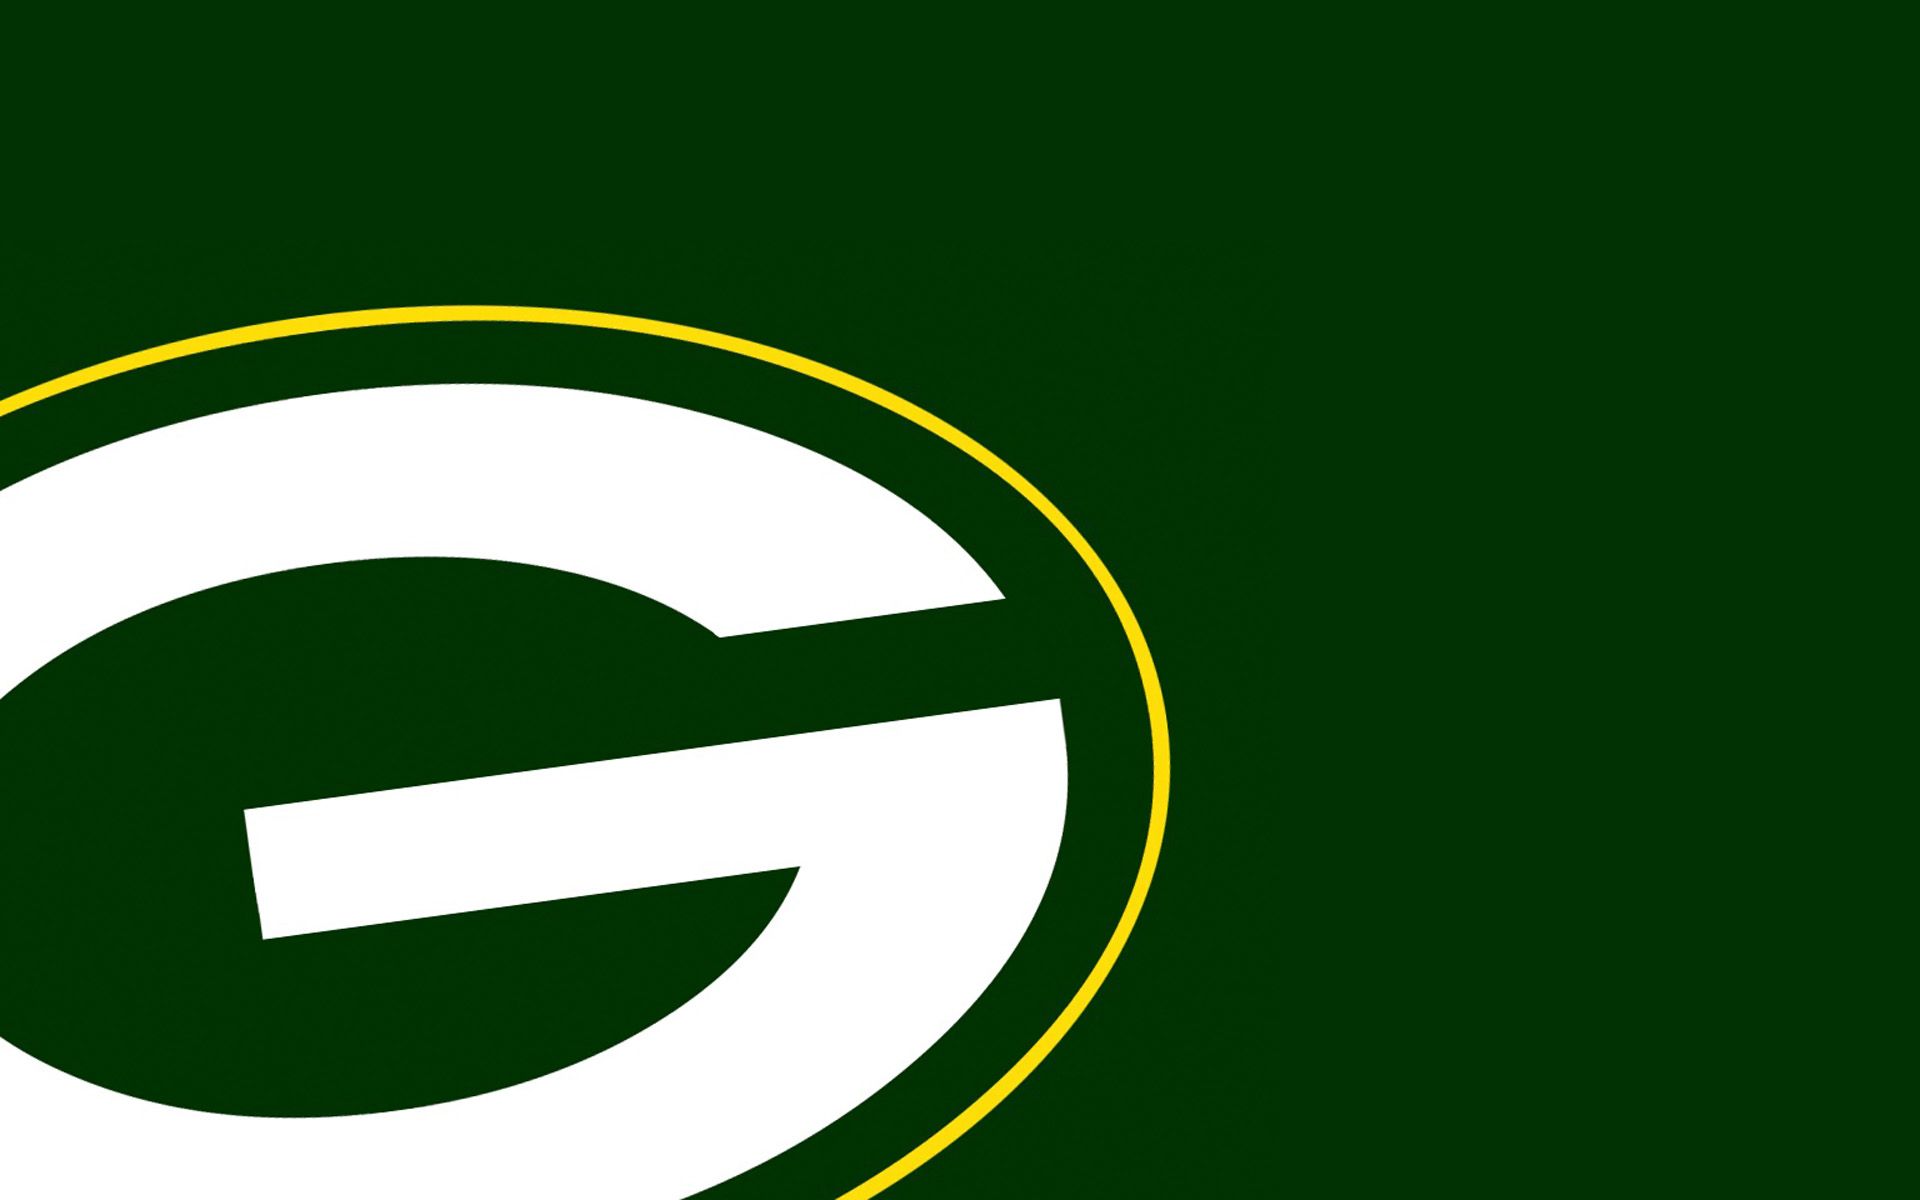 Green bay packers green 192012001 px photo cute Backgrounds